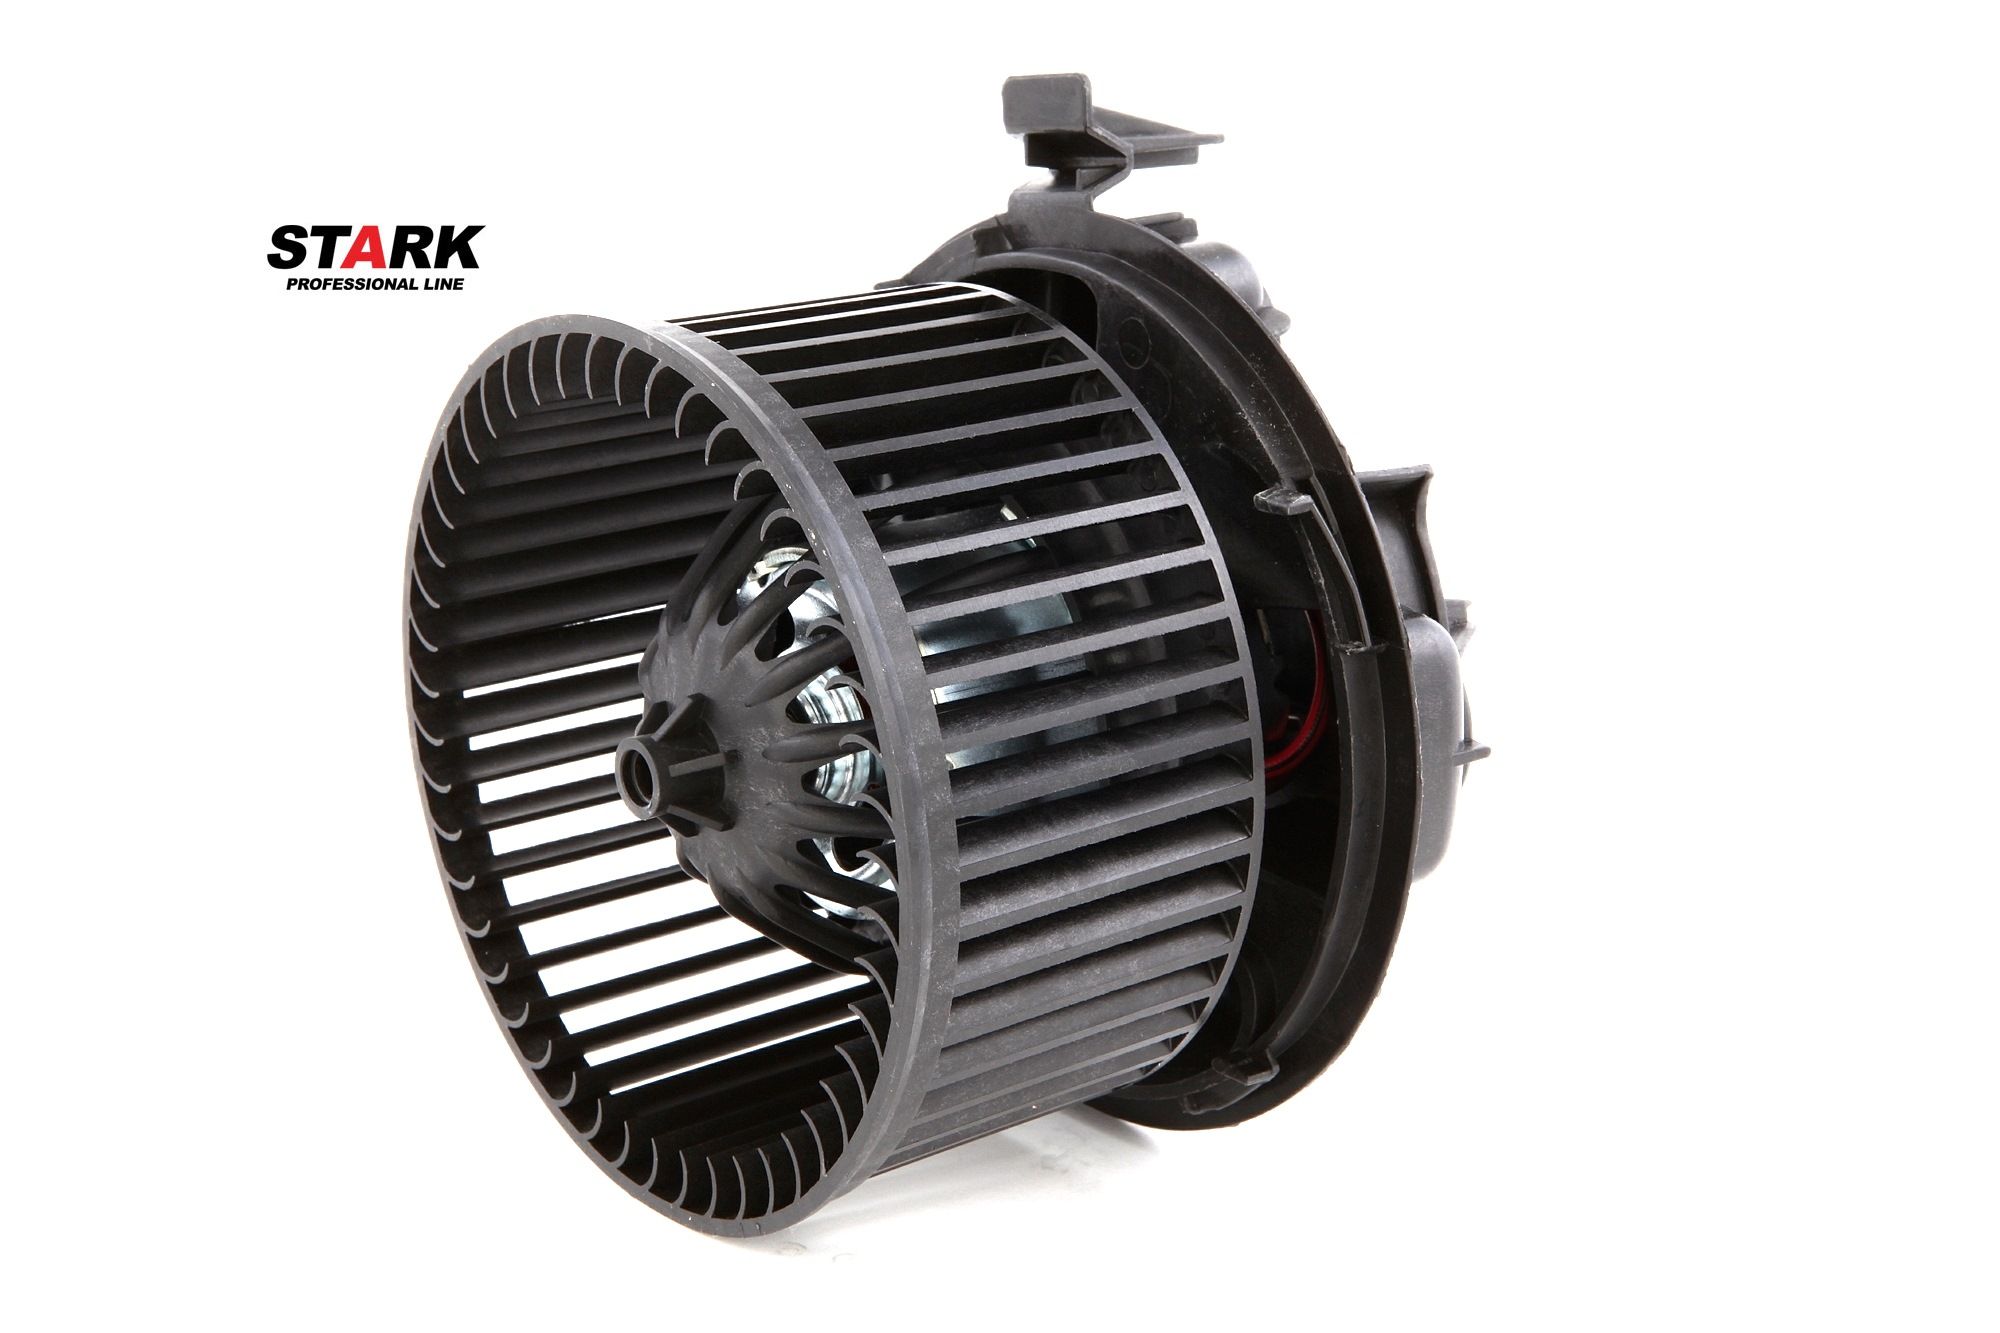 SKIB-0310002 STARK Heater blower motor CHEVROLET for vehicles with air conditioning